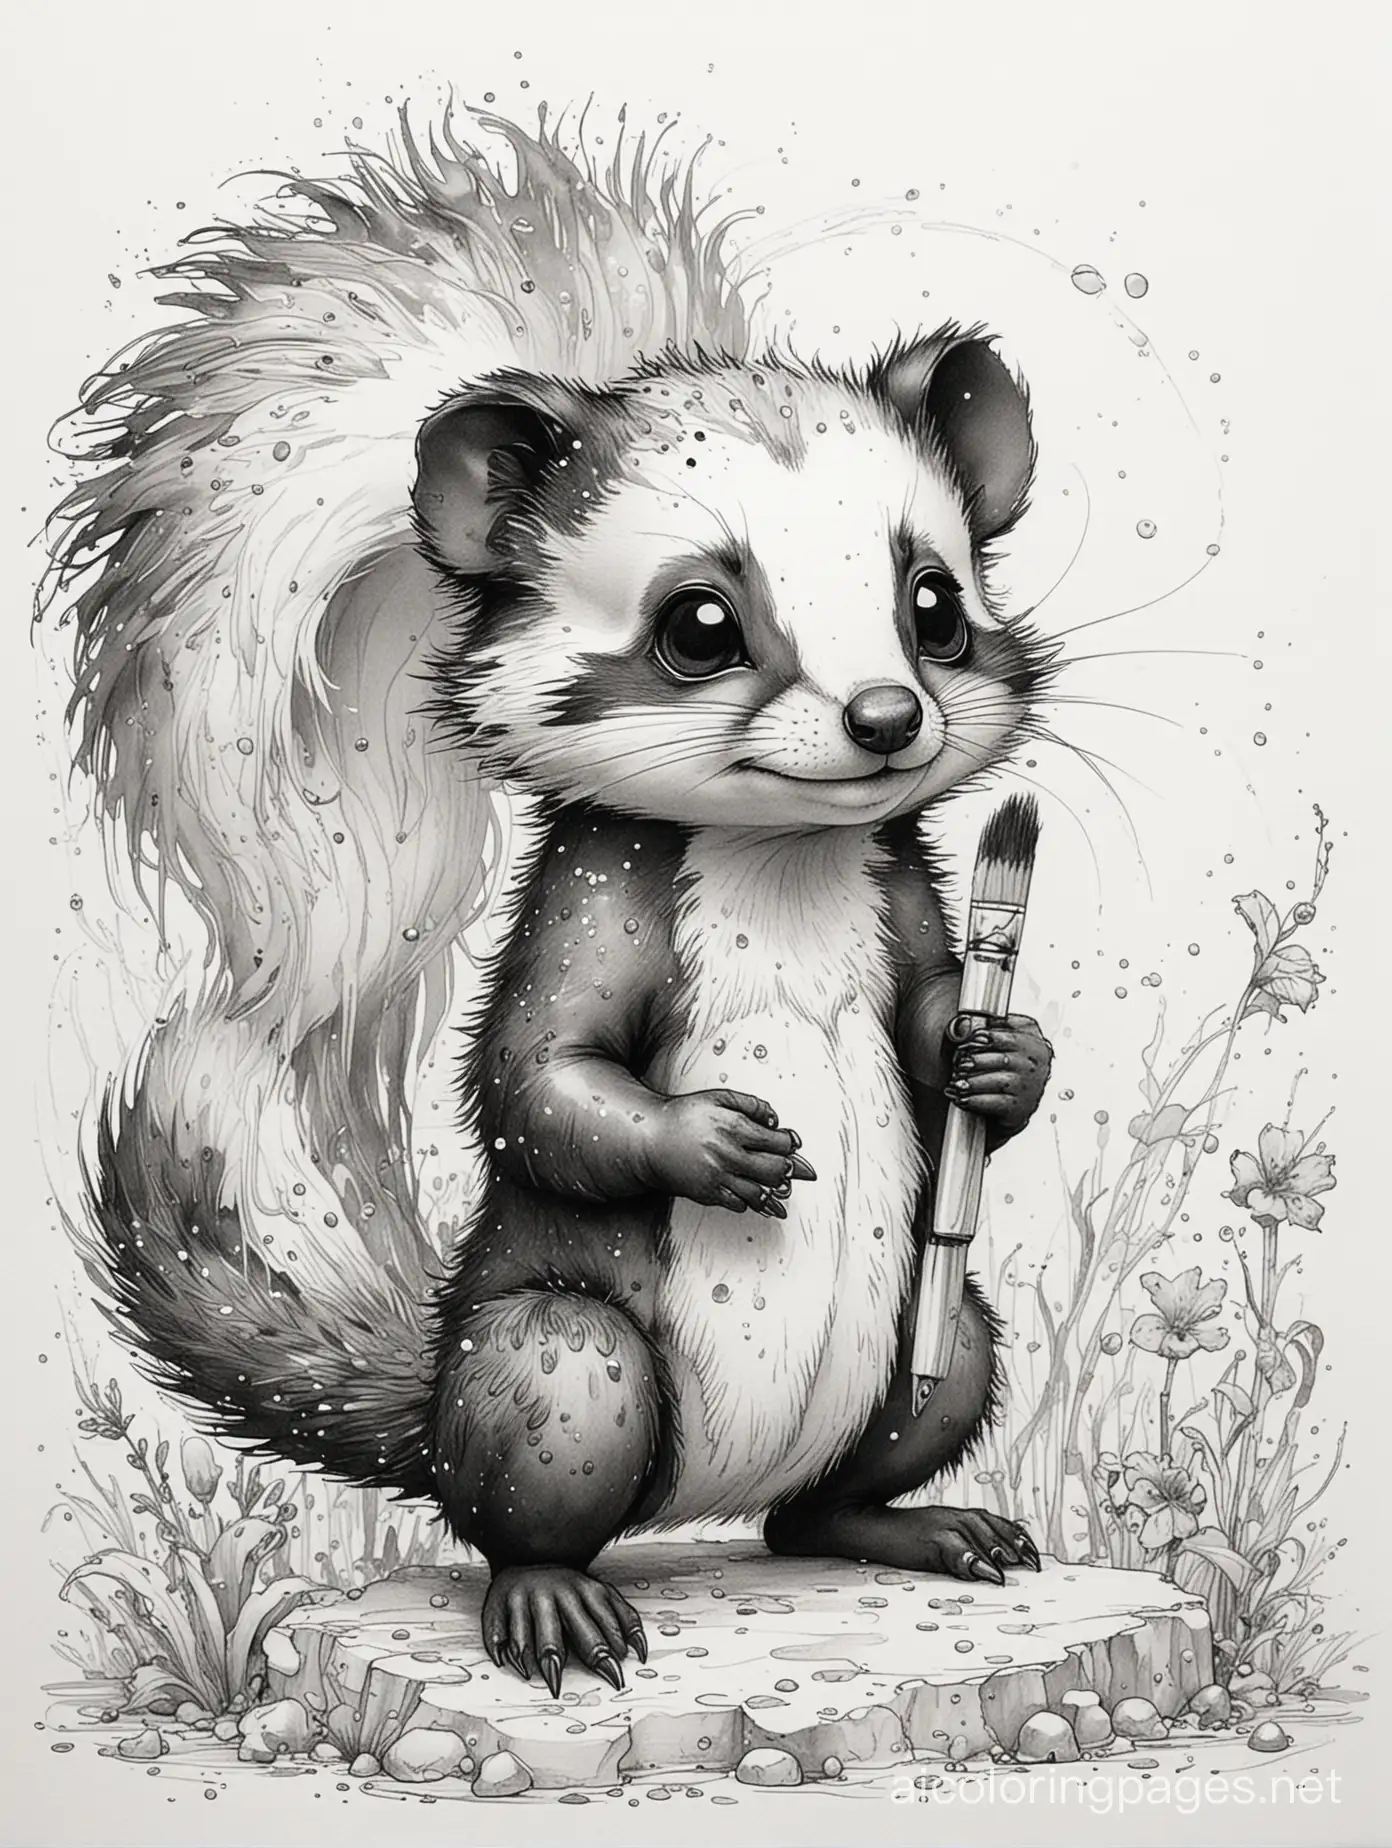 Wet grunge, black ink , cute chibi skunks, brush mark on white watercolor paper ,sketch illustration, described in the polka dot style of Alphonse Mucha and Jeremy Mann, Coloring Page, black and white, line art, white background, Simplicity, Ample White Space. The background of the coloring page is plain white to make it easy for young children to color within the lines. The outlines of all the subjects are easy to distinguish, making it simple for kids to color without too much difficulty